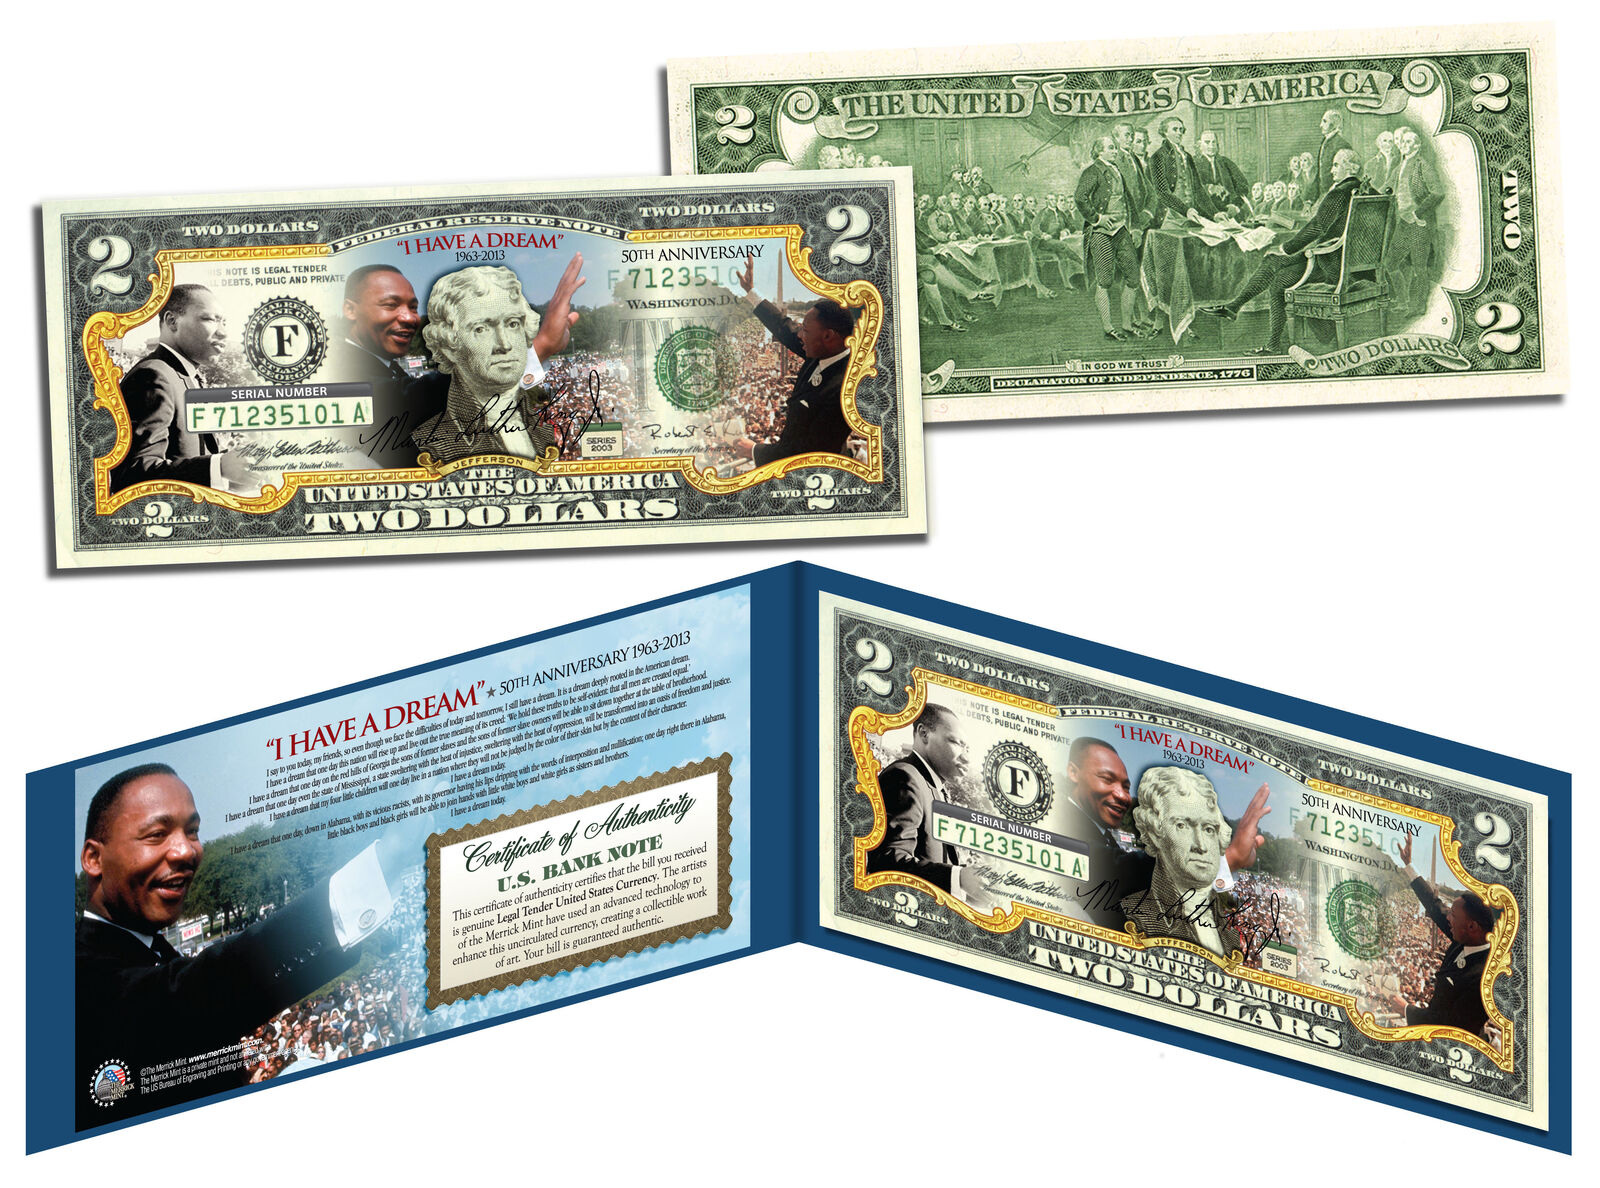 MARTIN LUTHER KING (MLK) * 50th Anniversary * Official Legal Tender U.S. $2 Bill